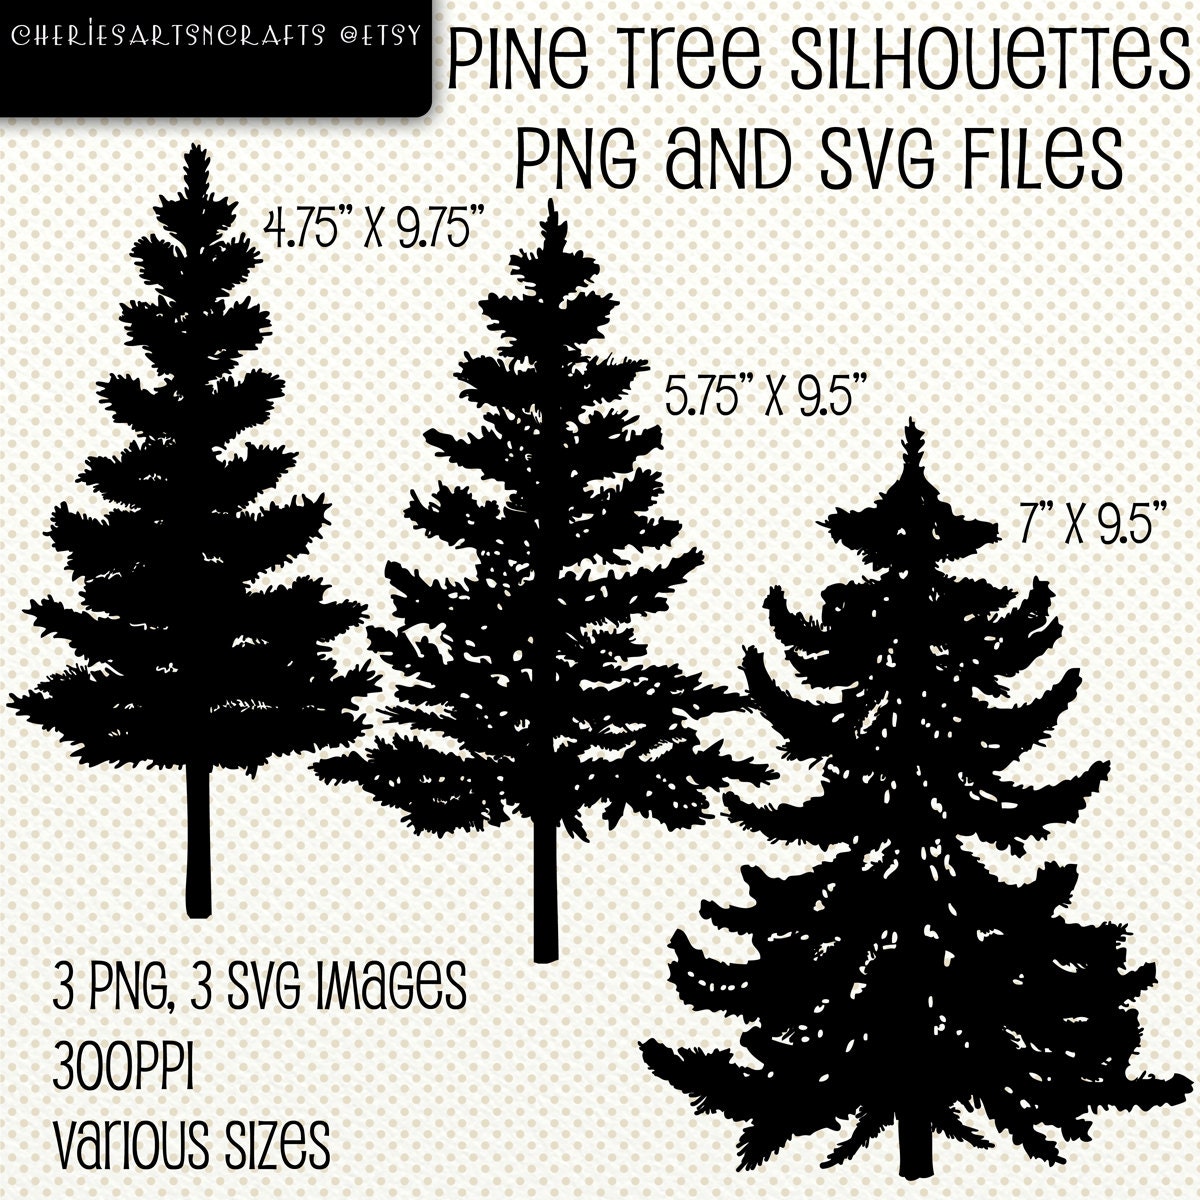 Pine Trees Silhouettes PNG and SVG Files Digital